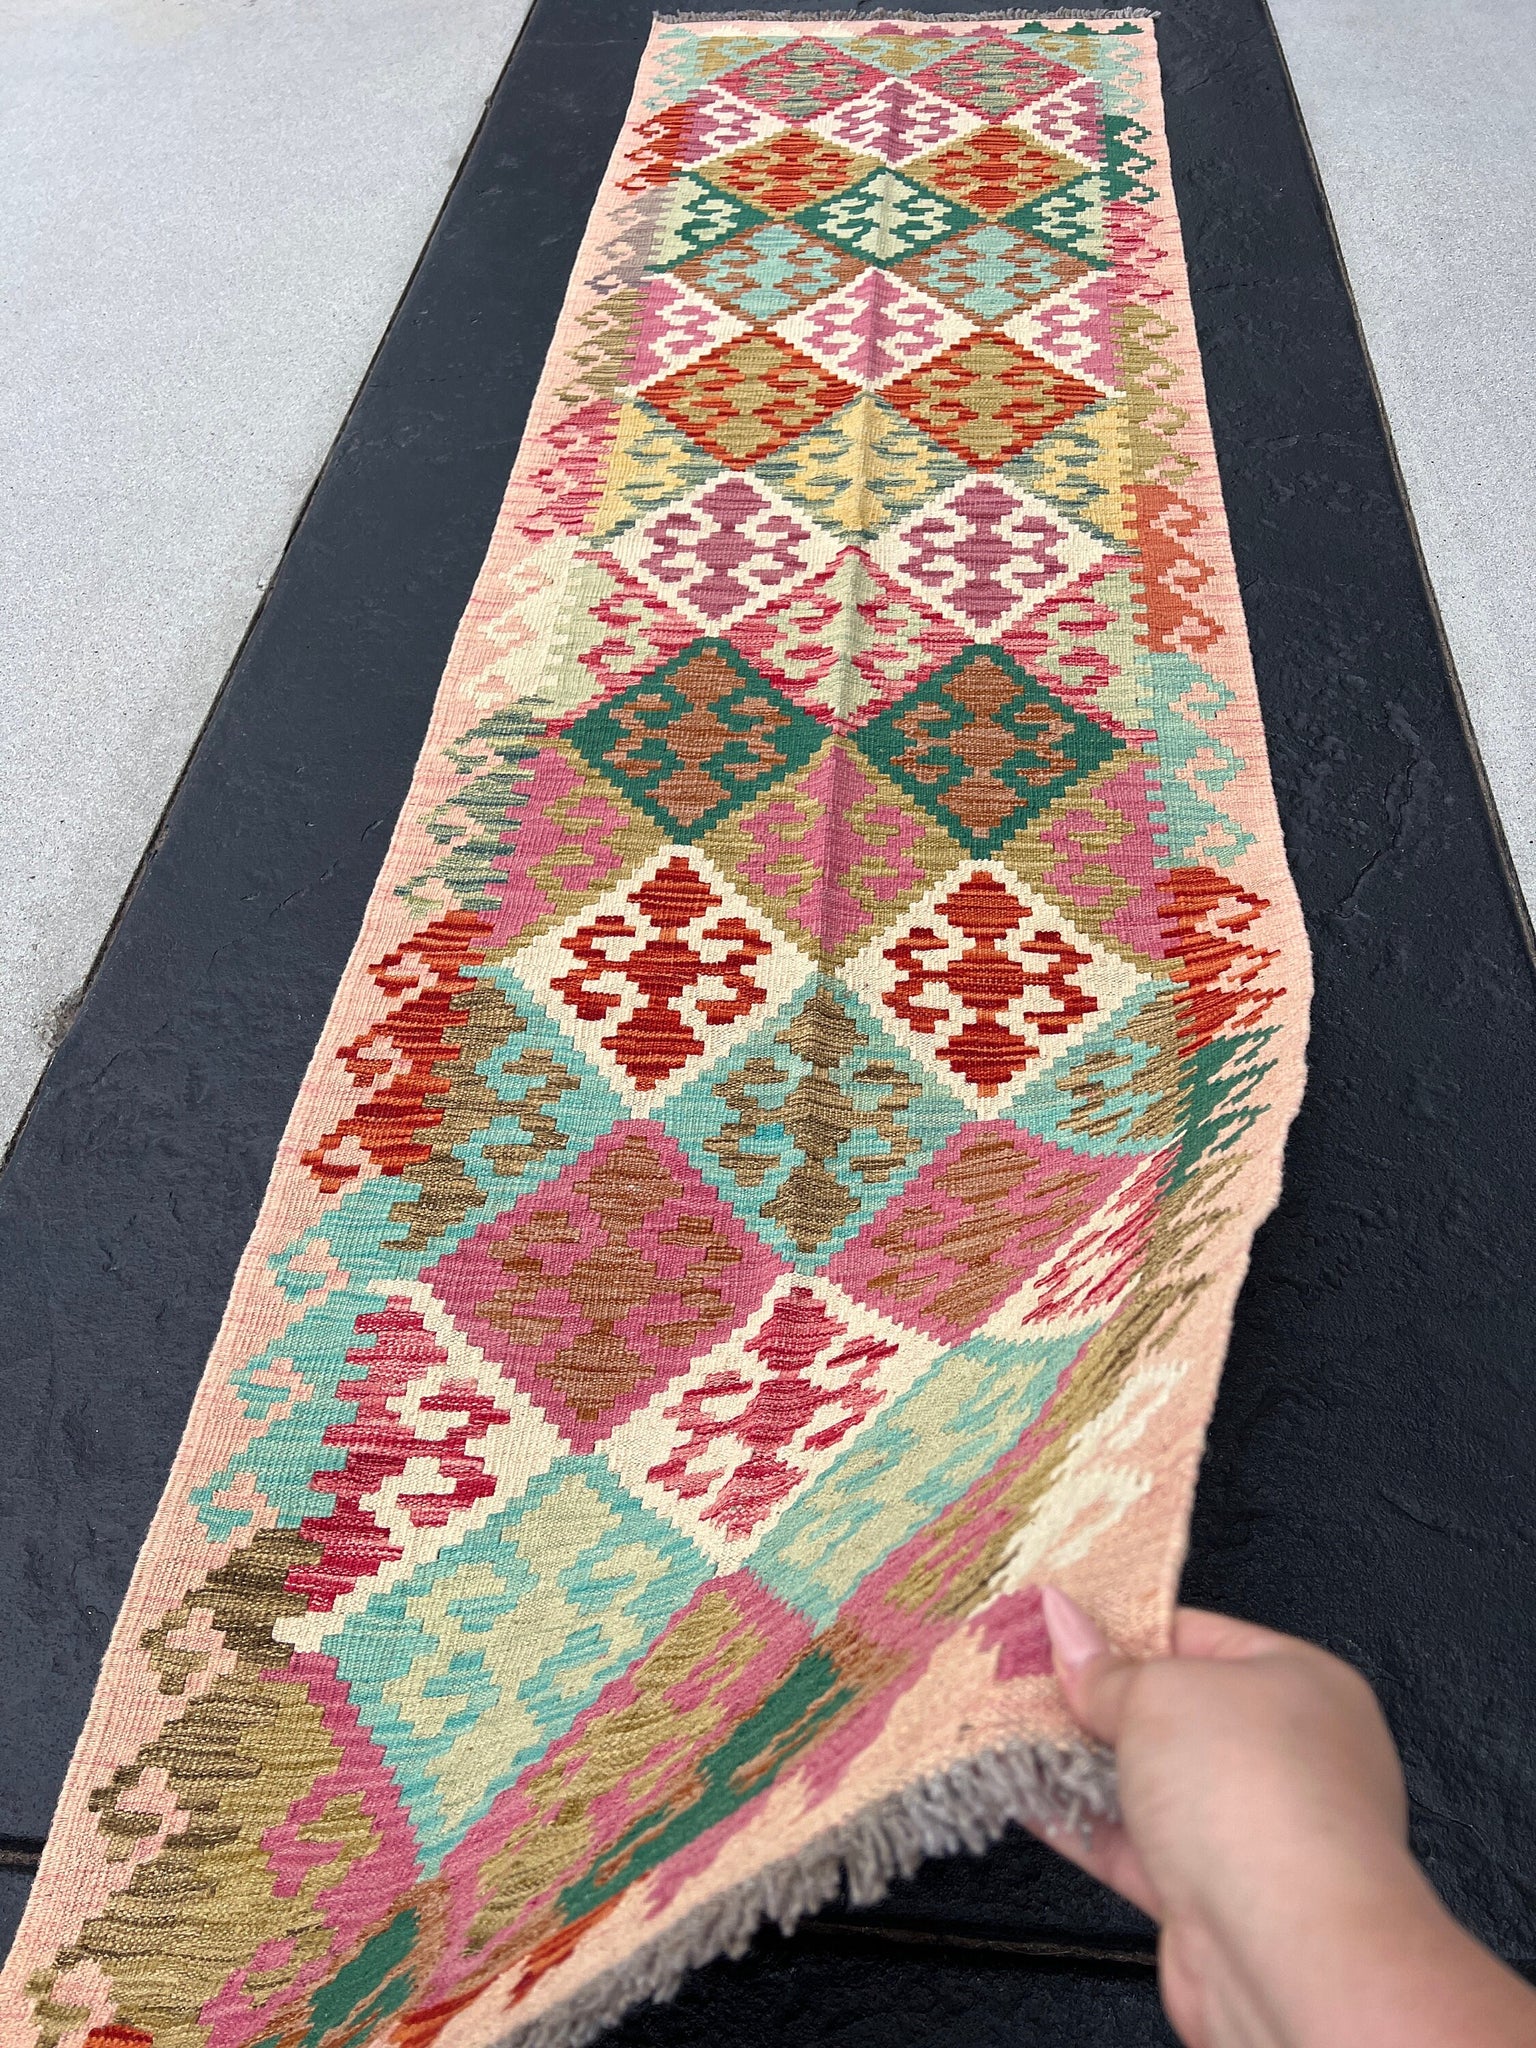 3x10 (91x305) Handmade Afghan Kilim Runner Rug | Coral Fuchsia Pink Turquoise Forest Moss Mint Green Blood Red Cream Brown | Wool Outdoor